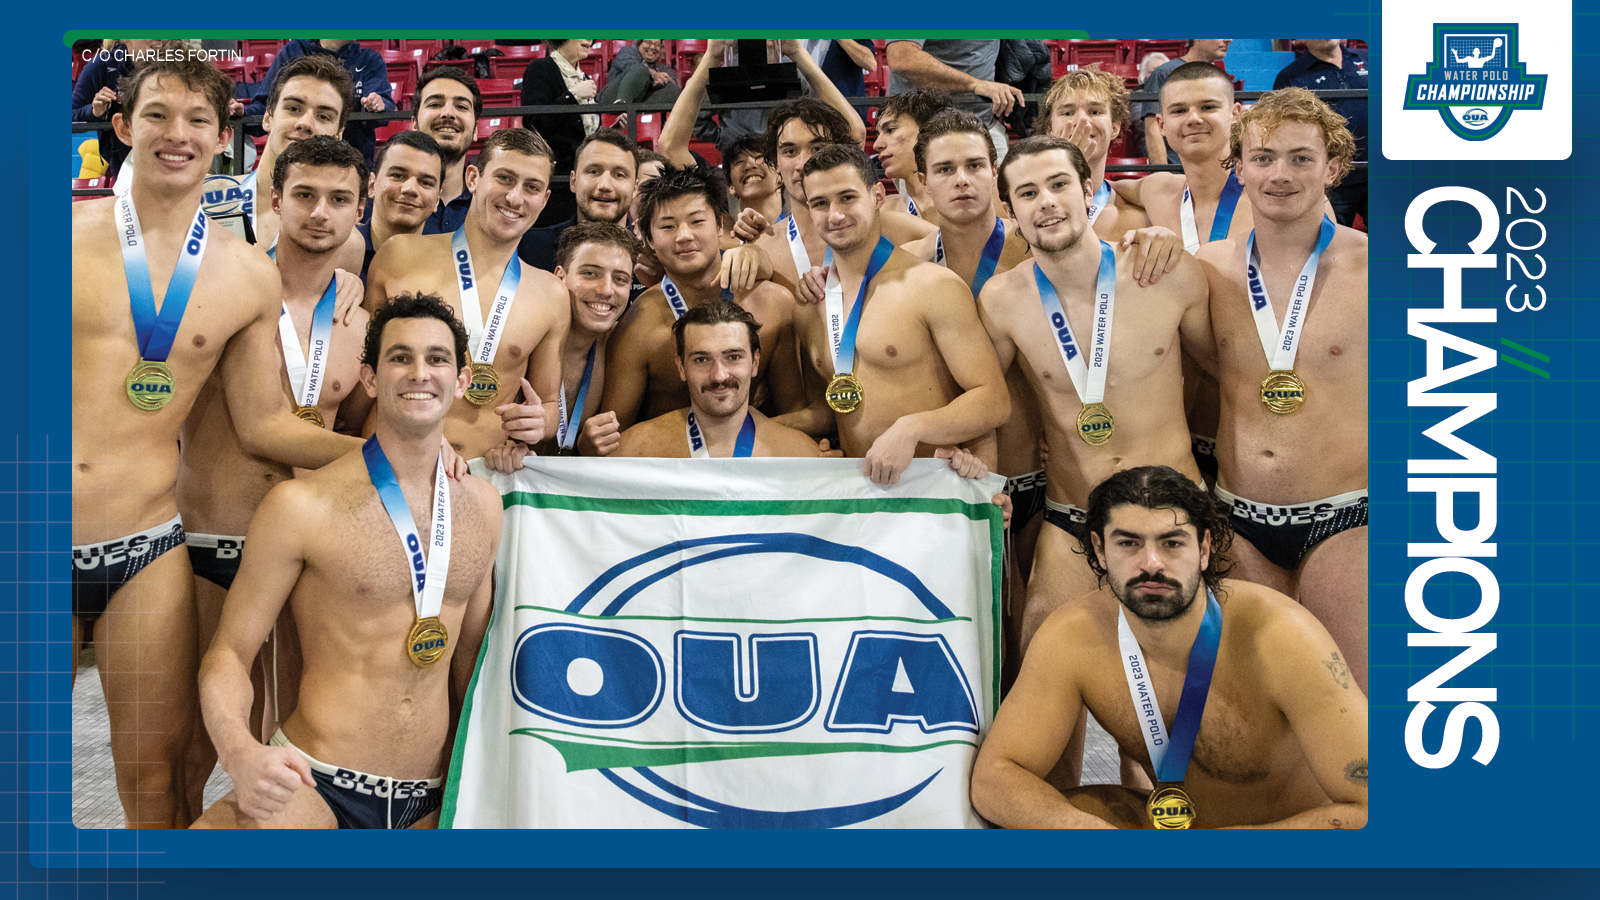 Predominantly blue graphic covered mostly by 2023 OUA Water Polo Championship banner photo, with the corresponding championship logo and white text reading '2023 Champions' on the right side